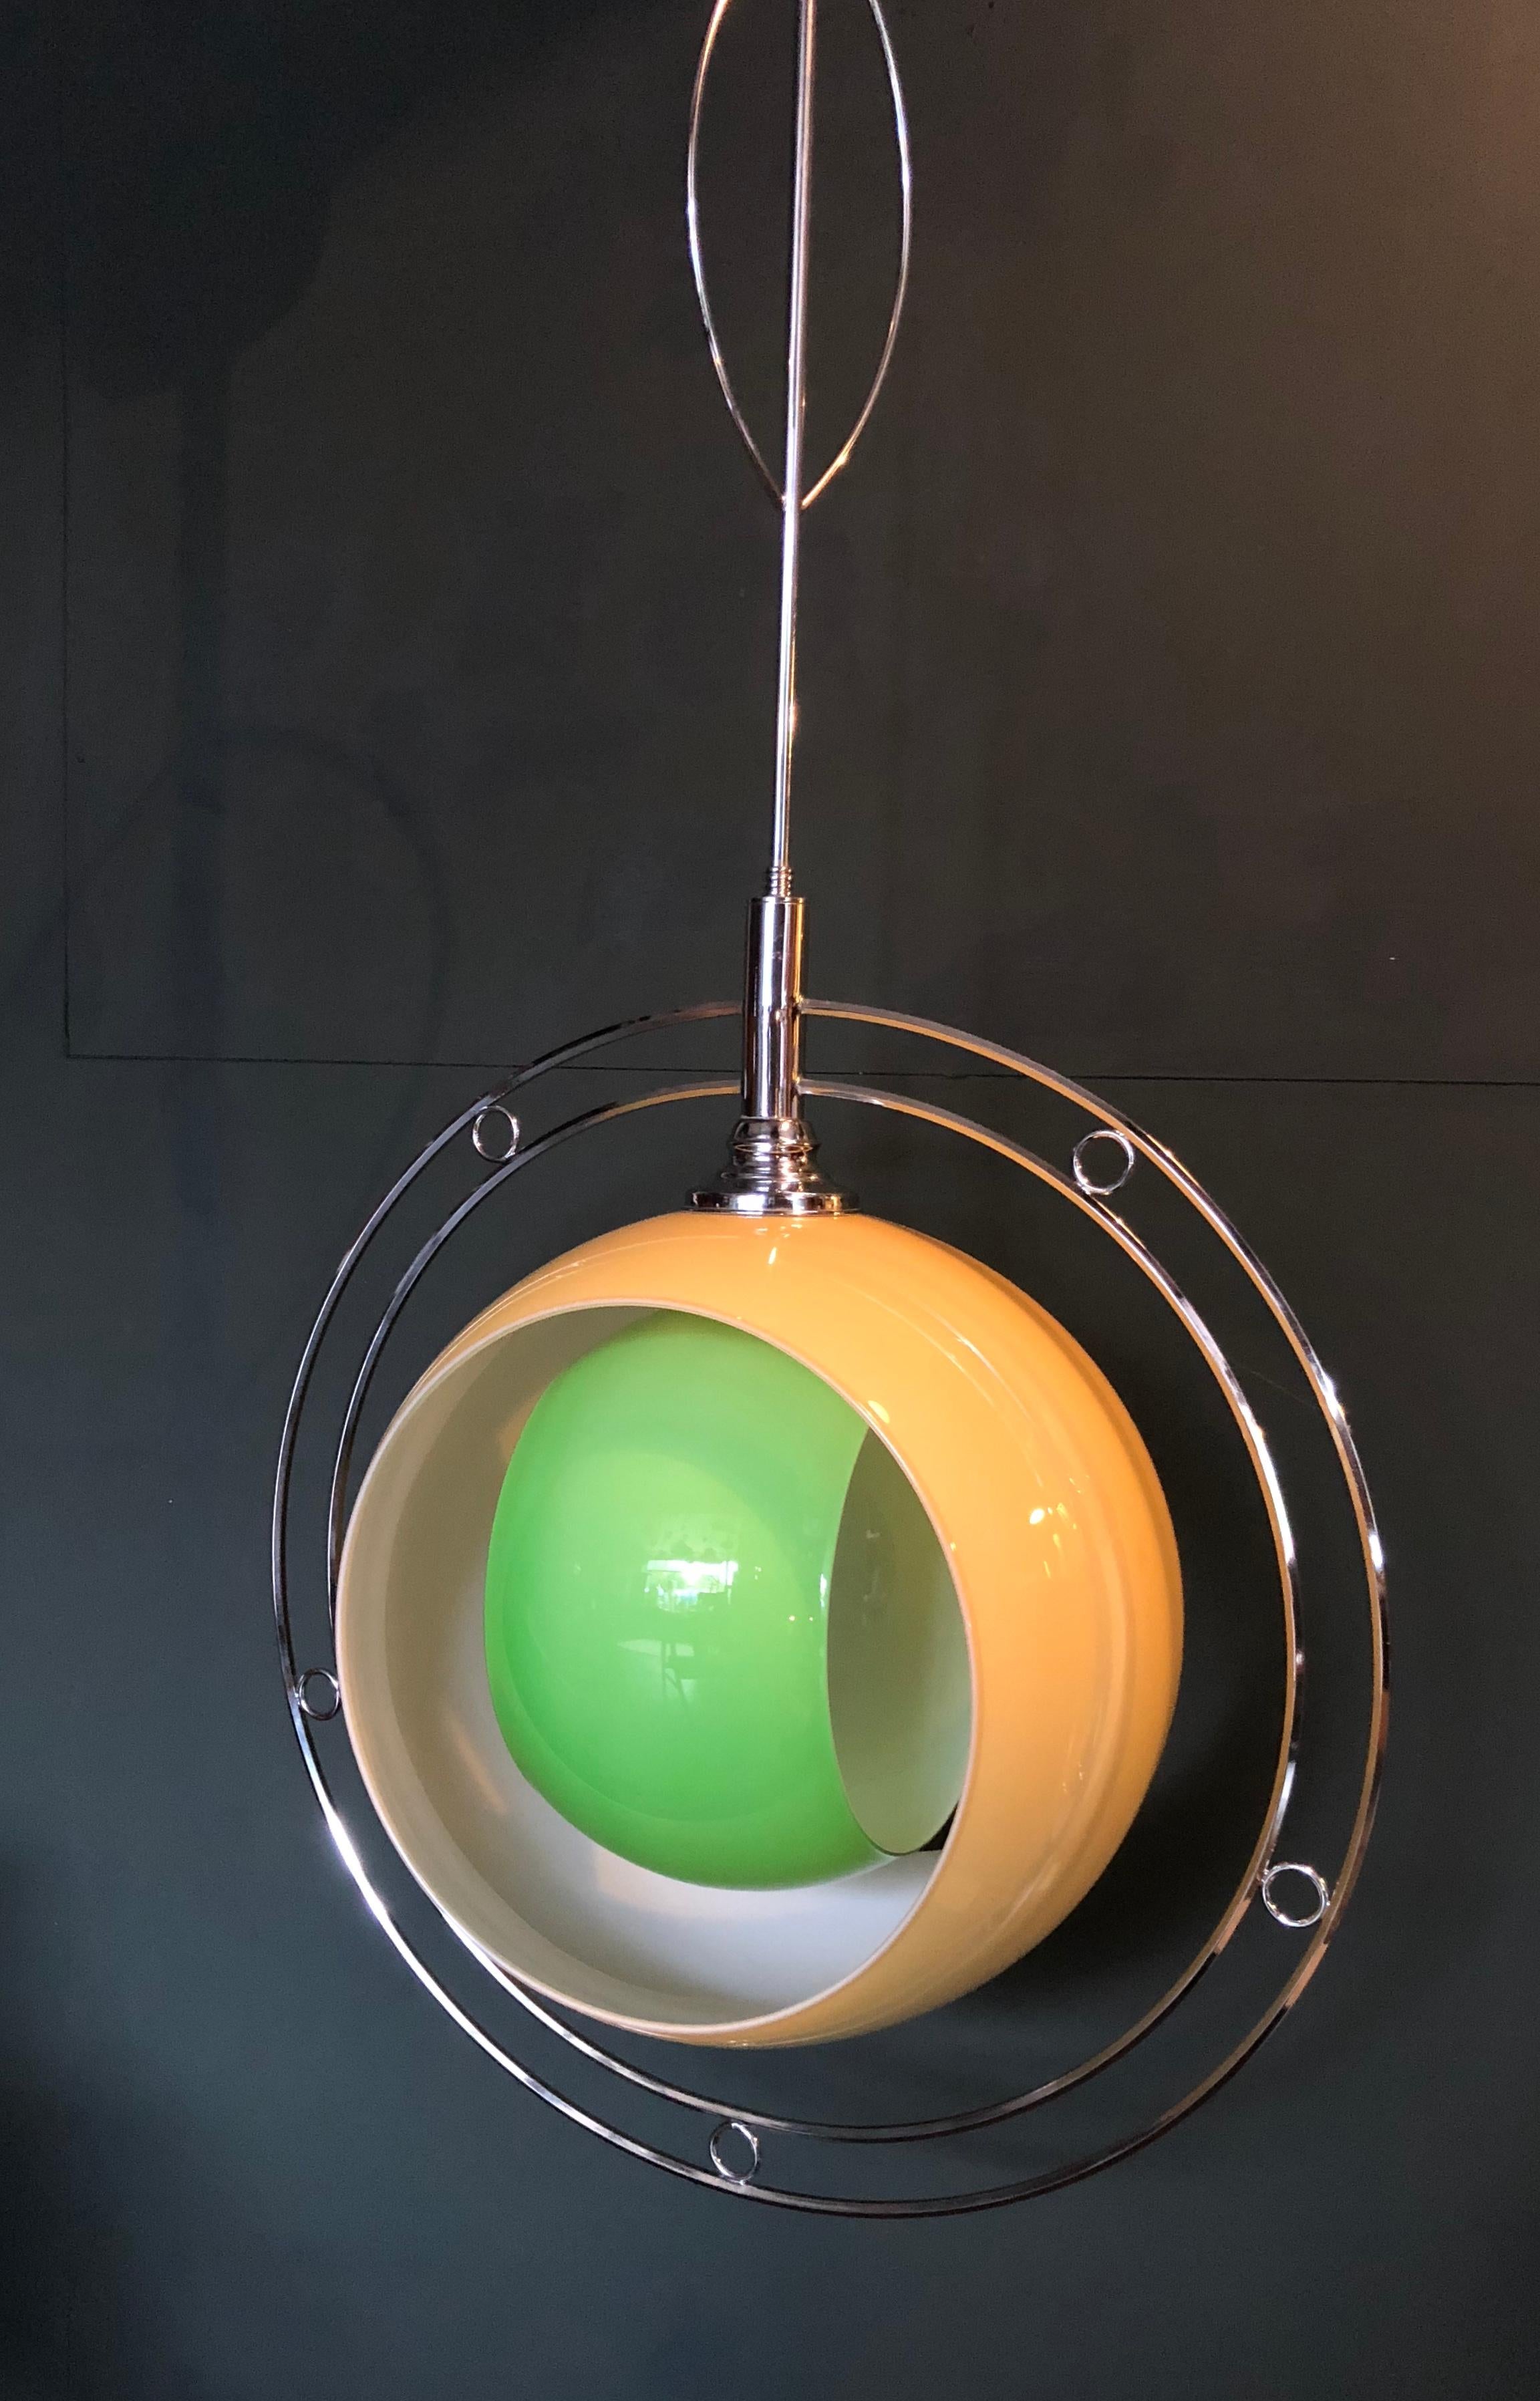 Huge pendant light design from Carlo Nason for Mazzega Murano, Italy, 1960s.
Model ‘Eclisse’. Unusual version. The Murano glass circles can rotate within each other creating a full lamp light or total eclipse glow. 130cm drop and 65cm diameter.